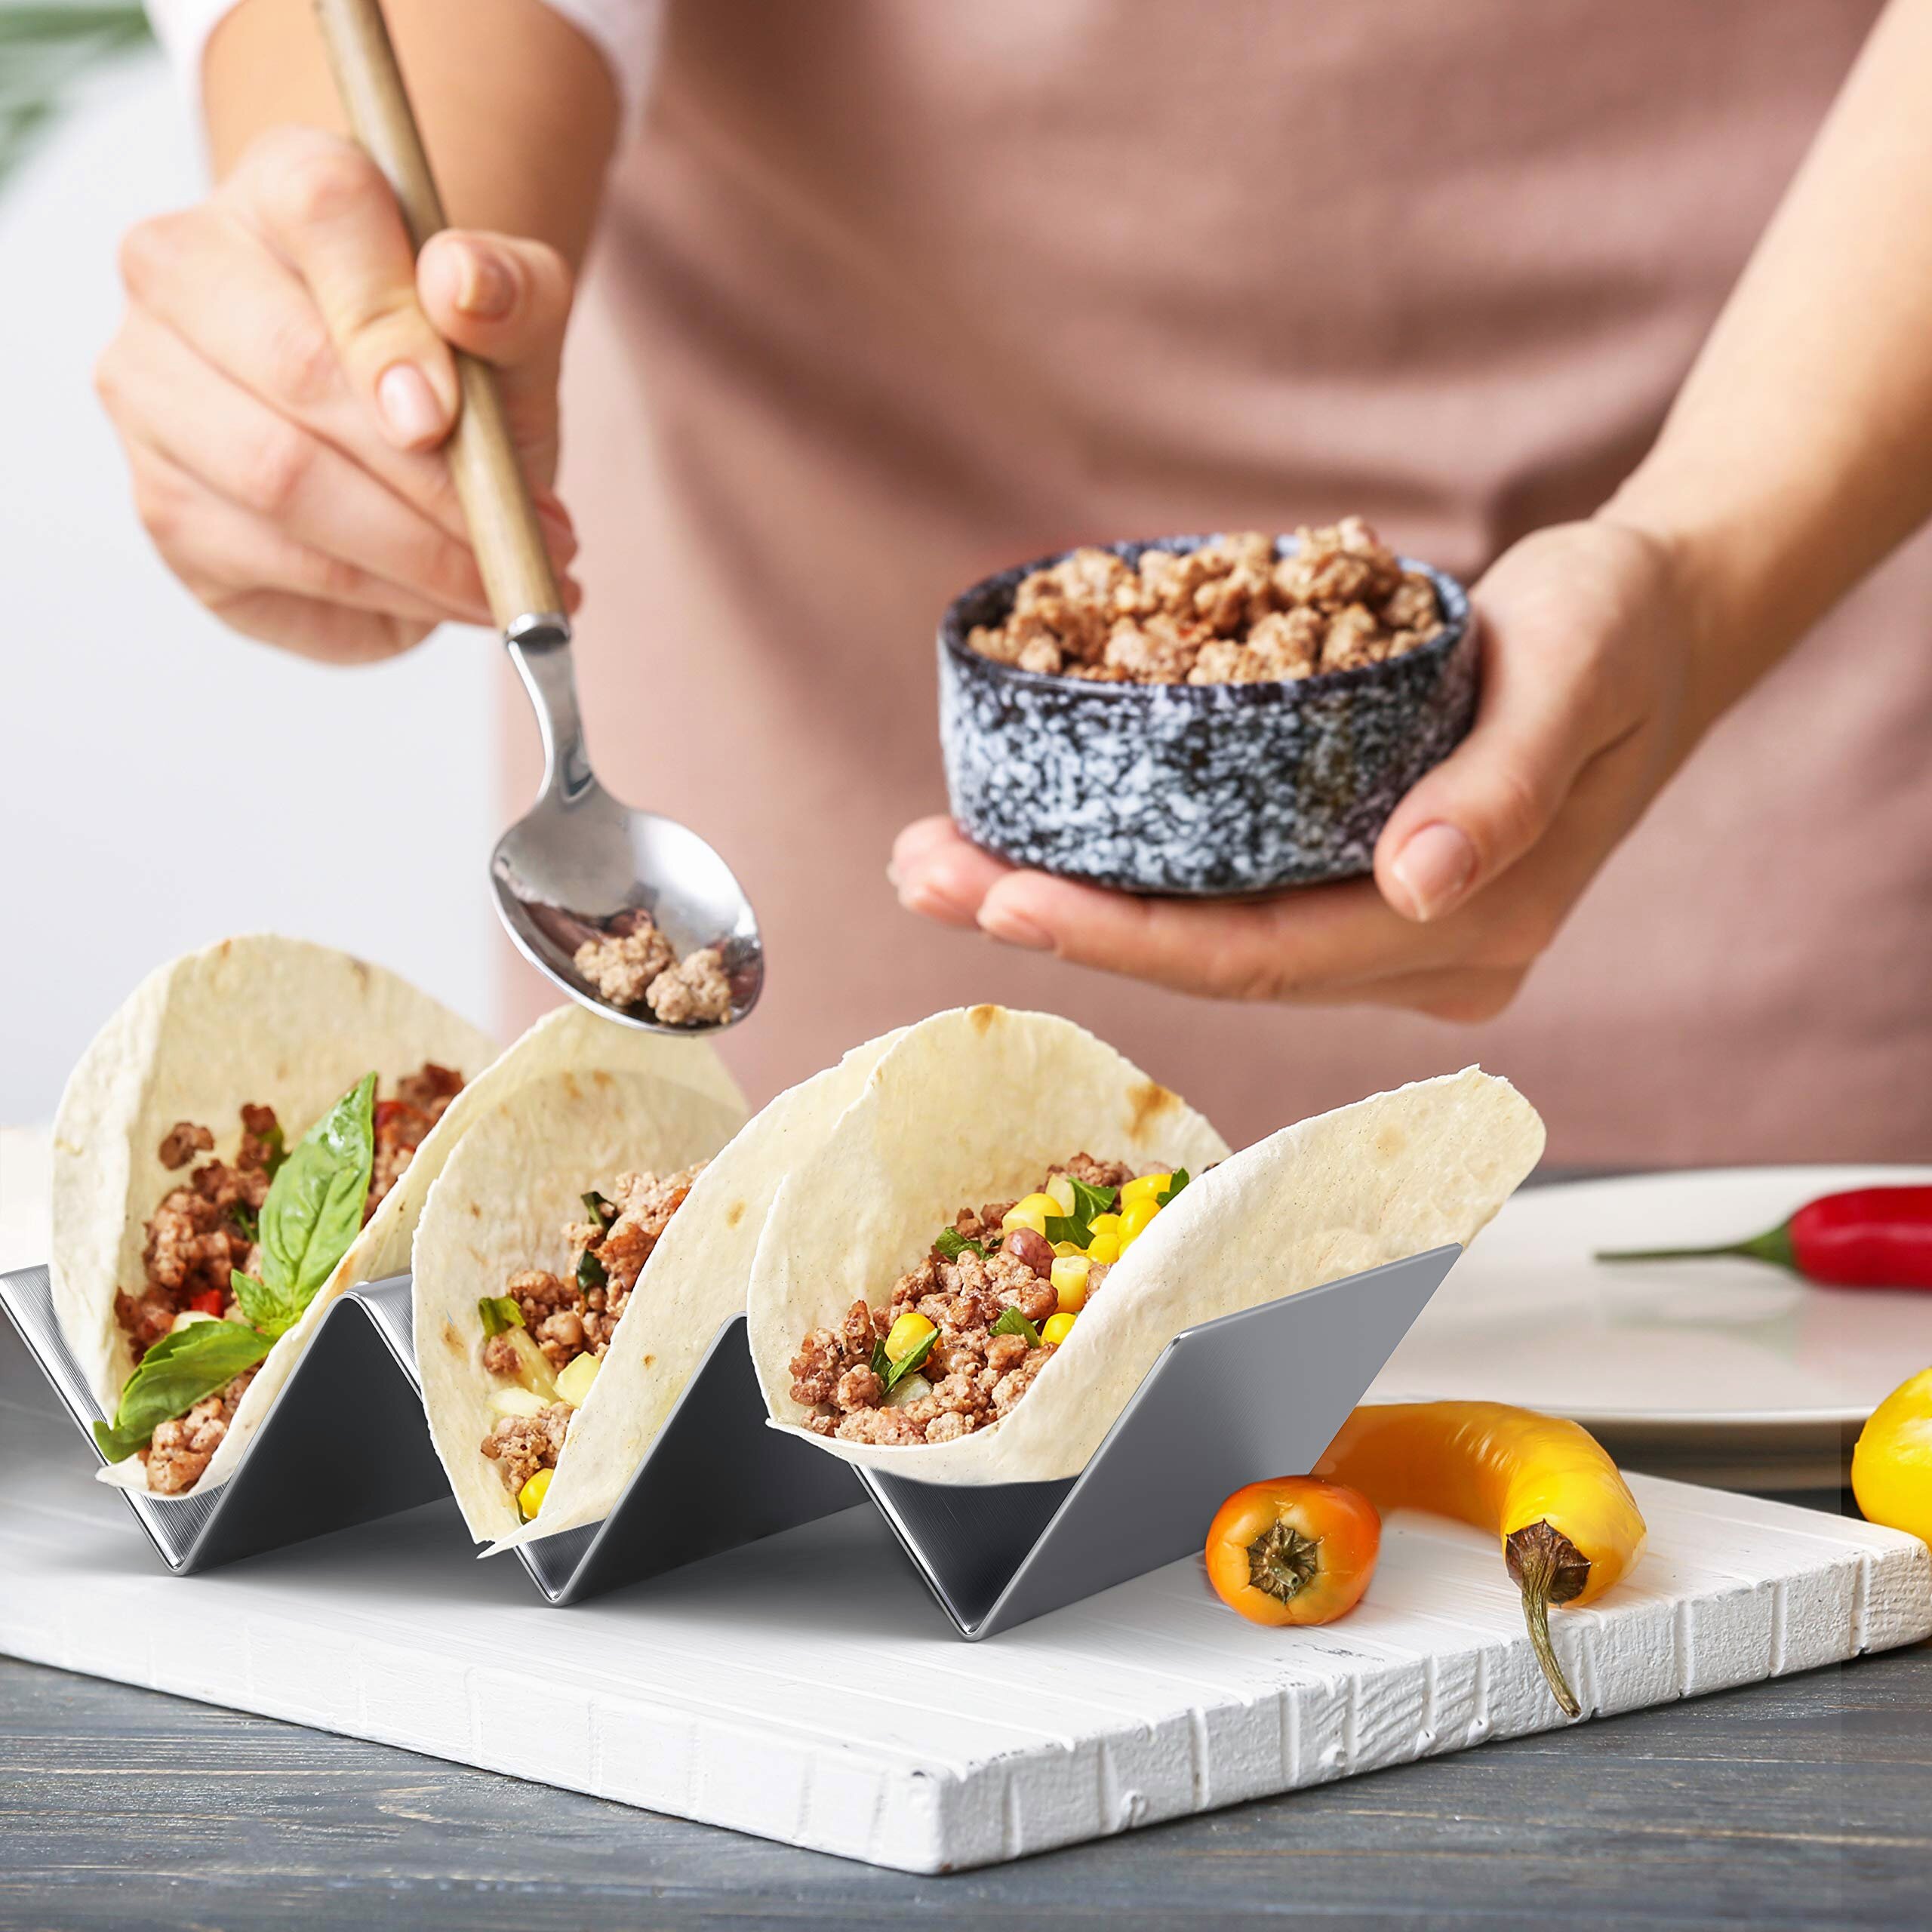 Stainless Steel Taco Holder,Taco Stand,Holds 3 or 4 Hard Soft Shell Tacos,Dishwasher Safe Taco Rack,Truck Tray Style for Baking Set of 2 